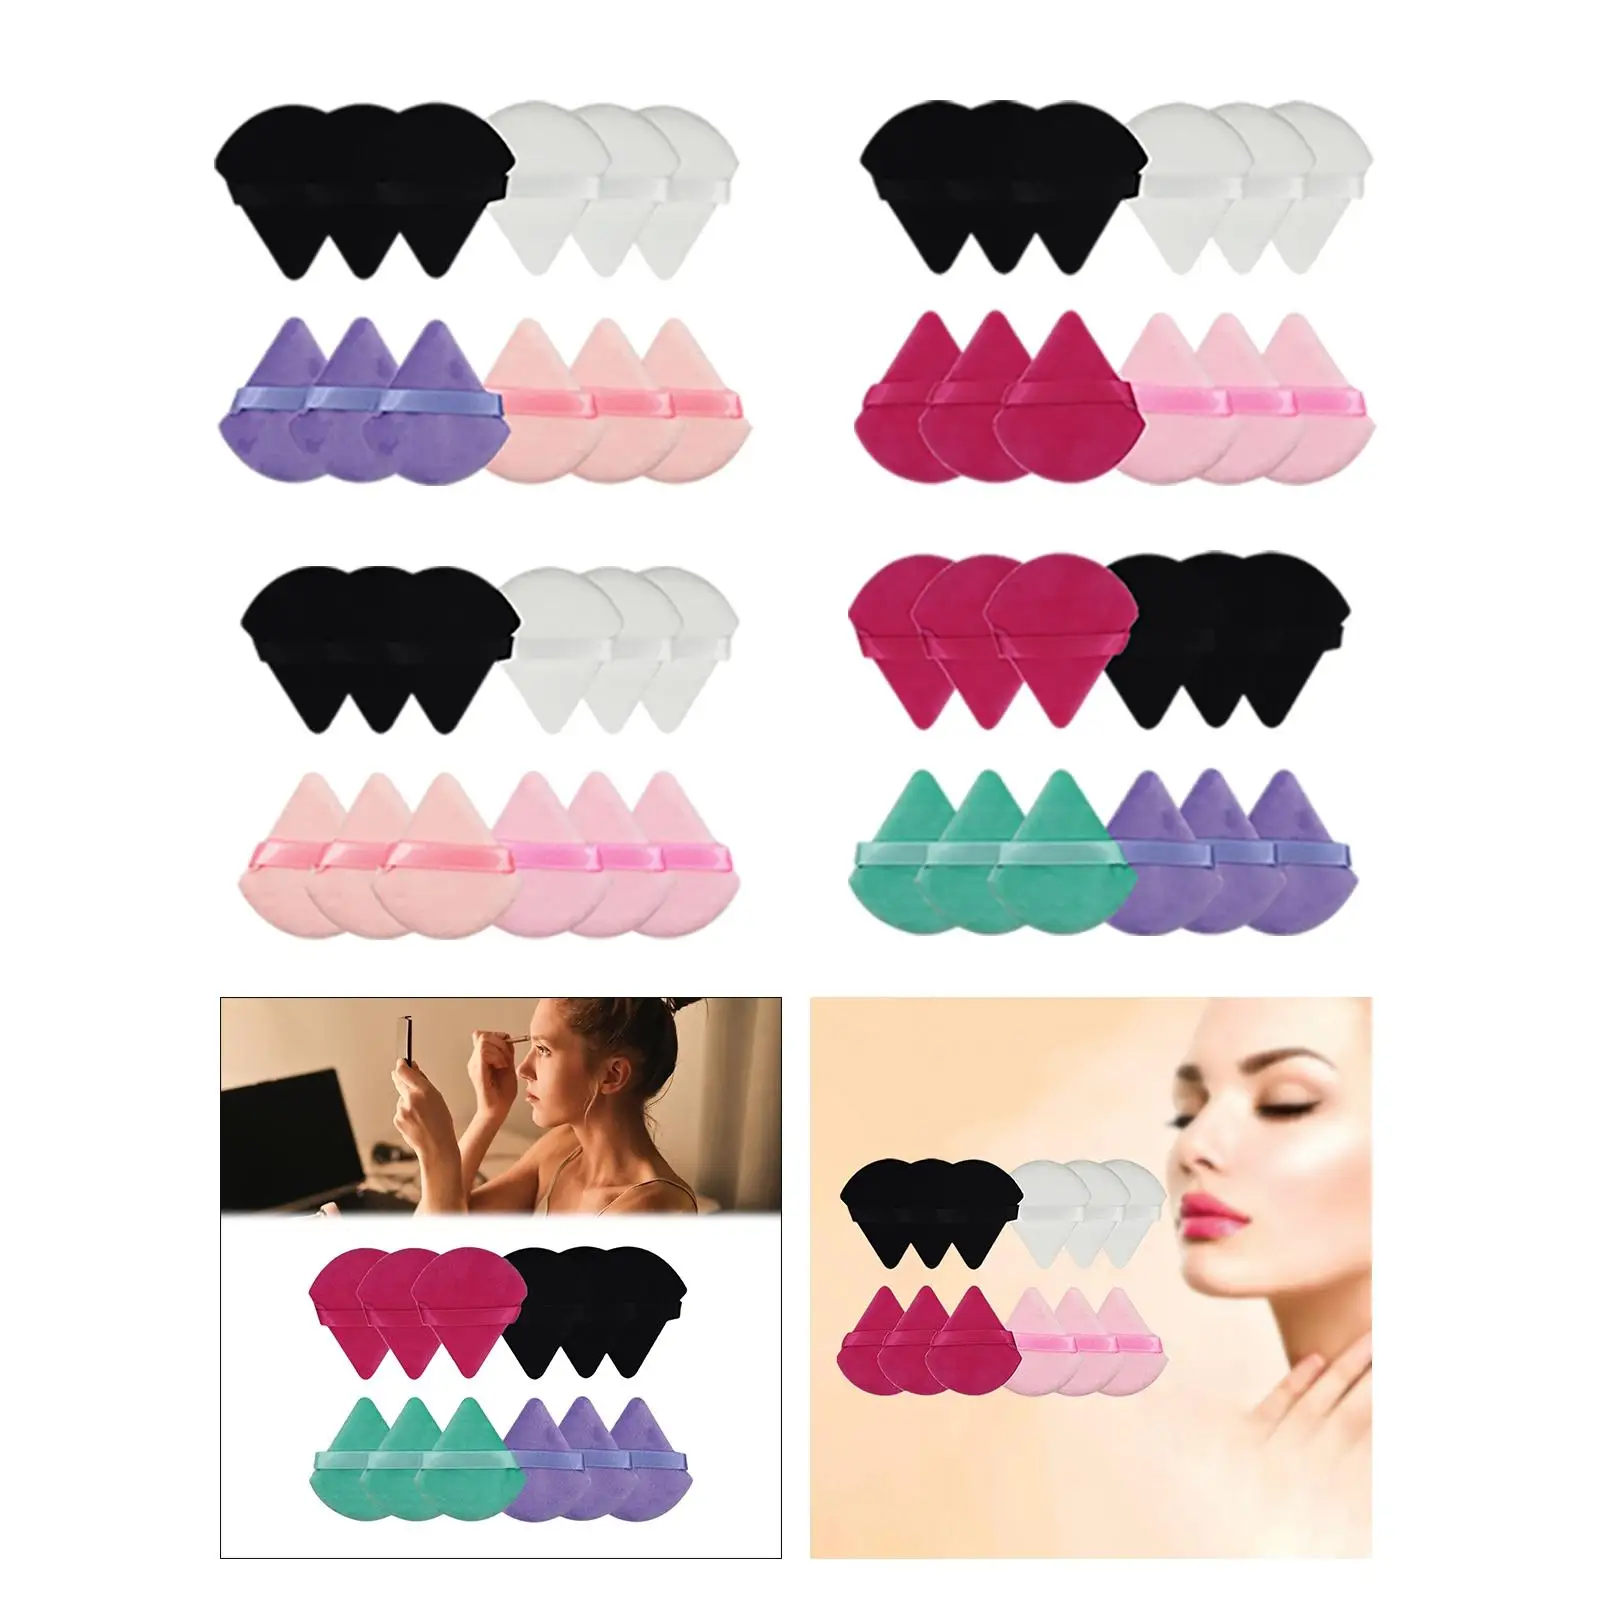 12x Triangle Powder Beauty Makeup Tool Pure Color Washable with Strap Makeup Puff for Loose Powder Body Powder Eye Shadow